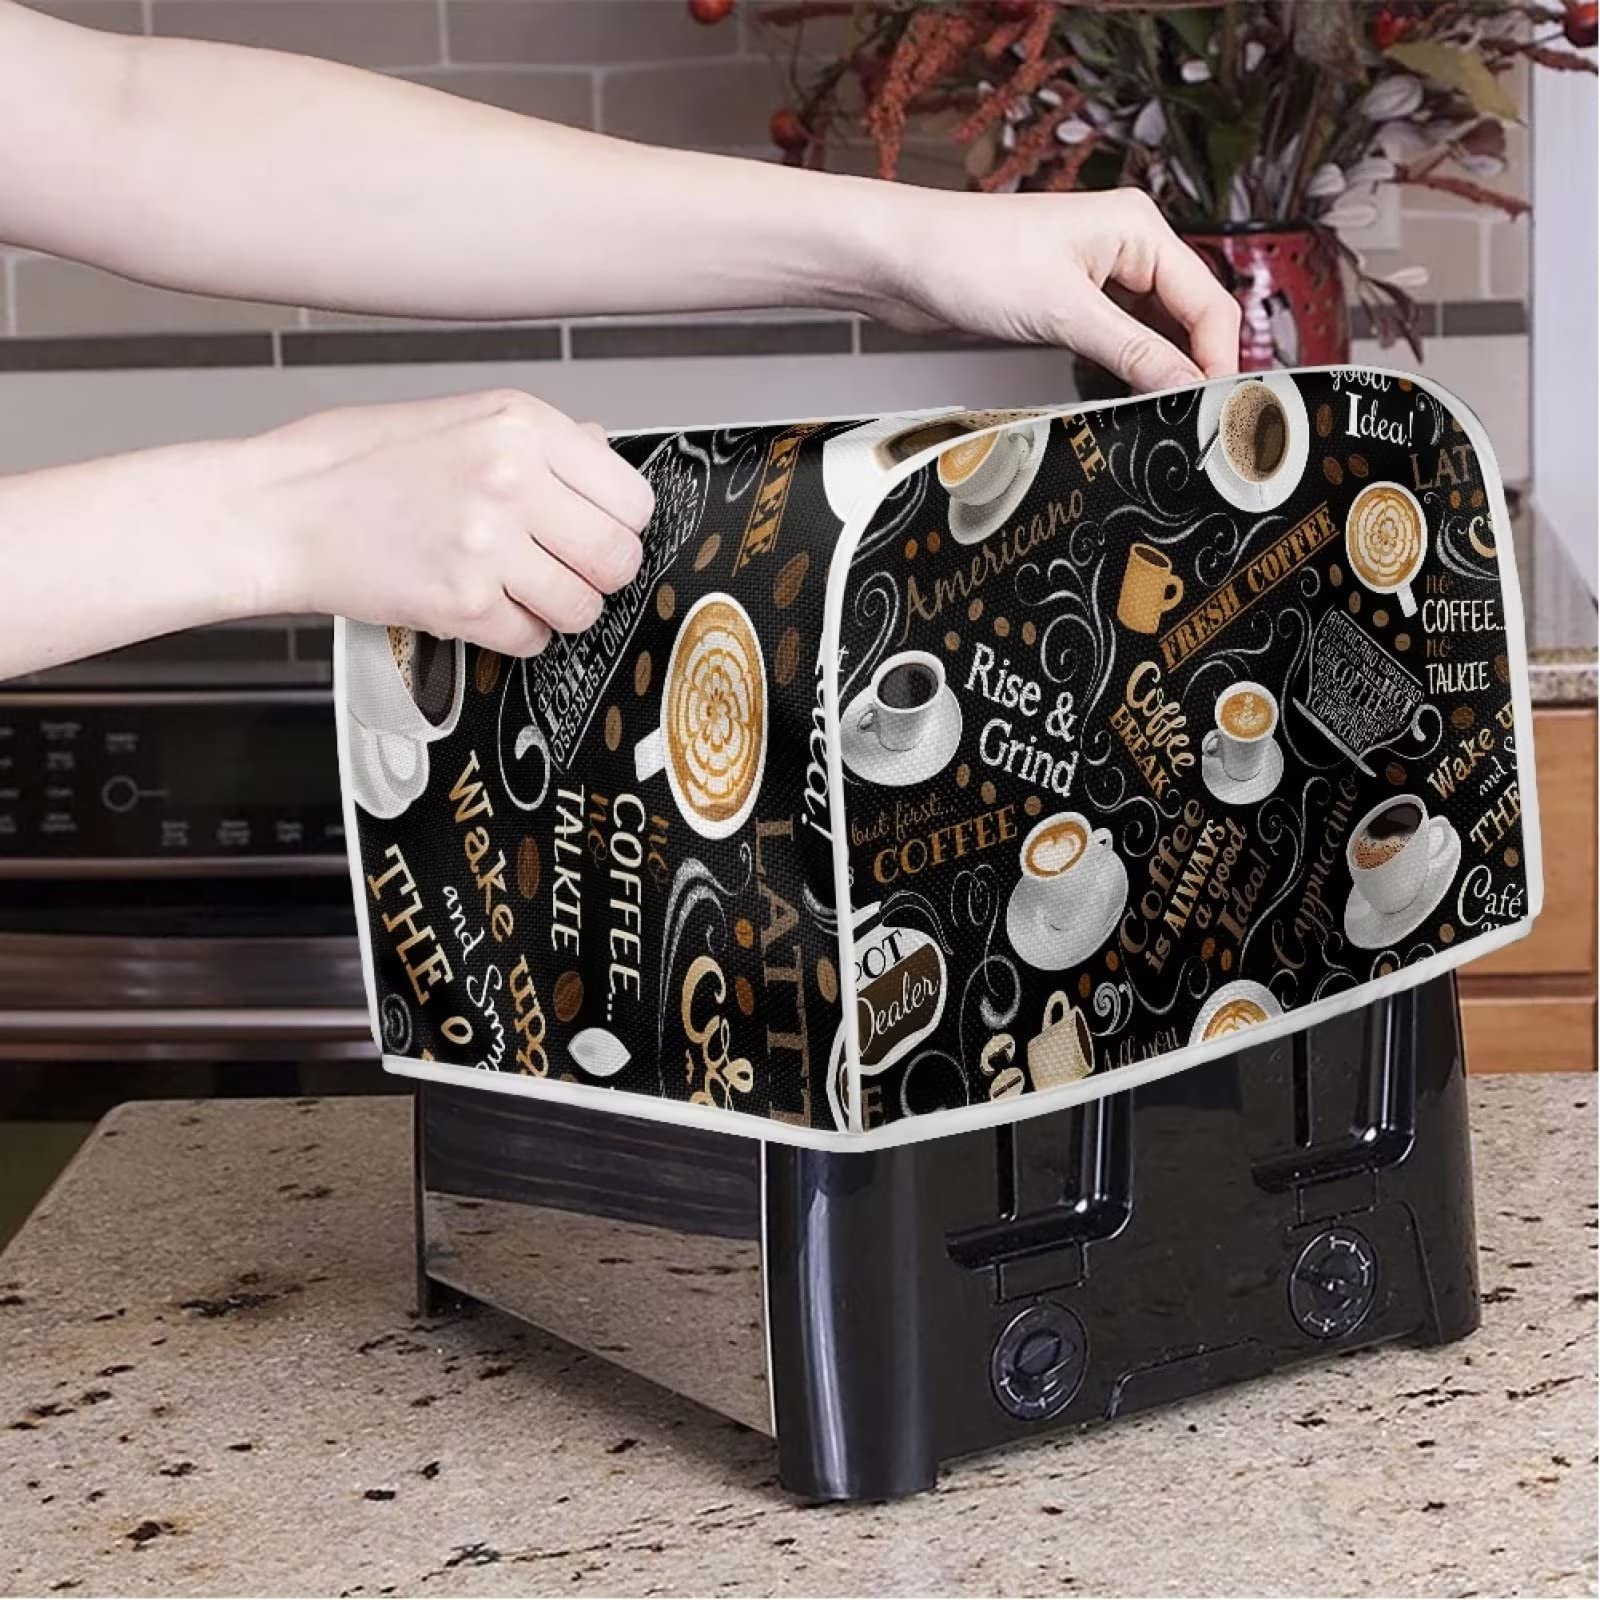 Mumeson Coffee Print Toaster Covers Kitchen Accessories Decor Bread Maker Oven Protector Covers 2 Slice Toaster Dust Proof Fingerprint Covers Kitchen Decoration